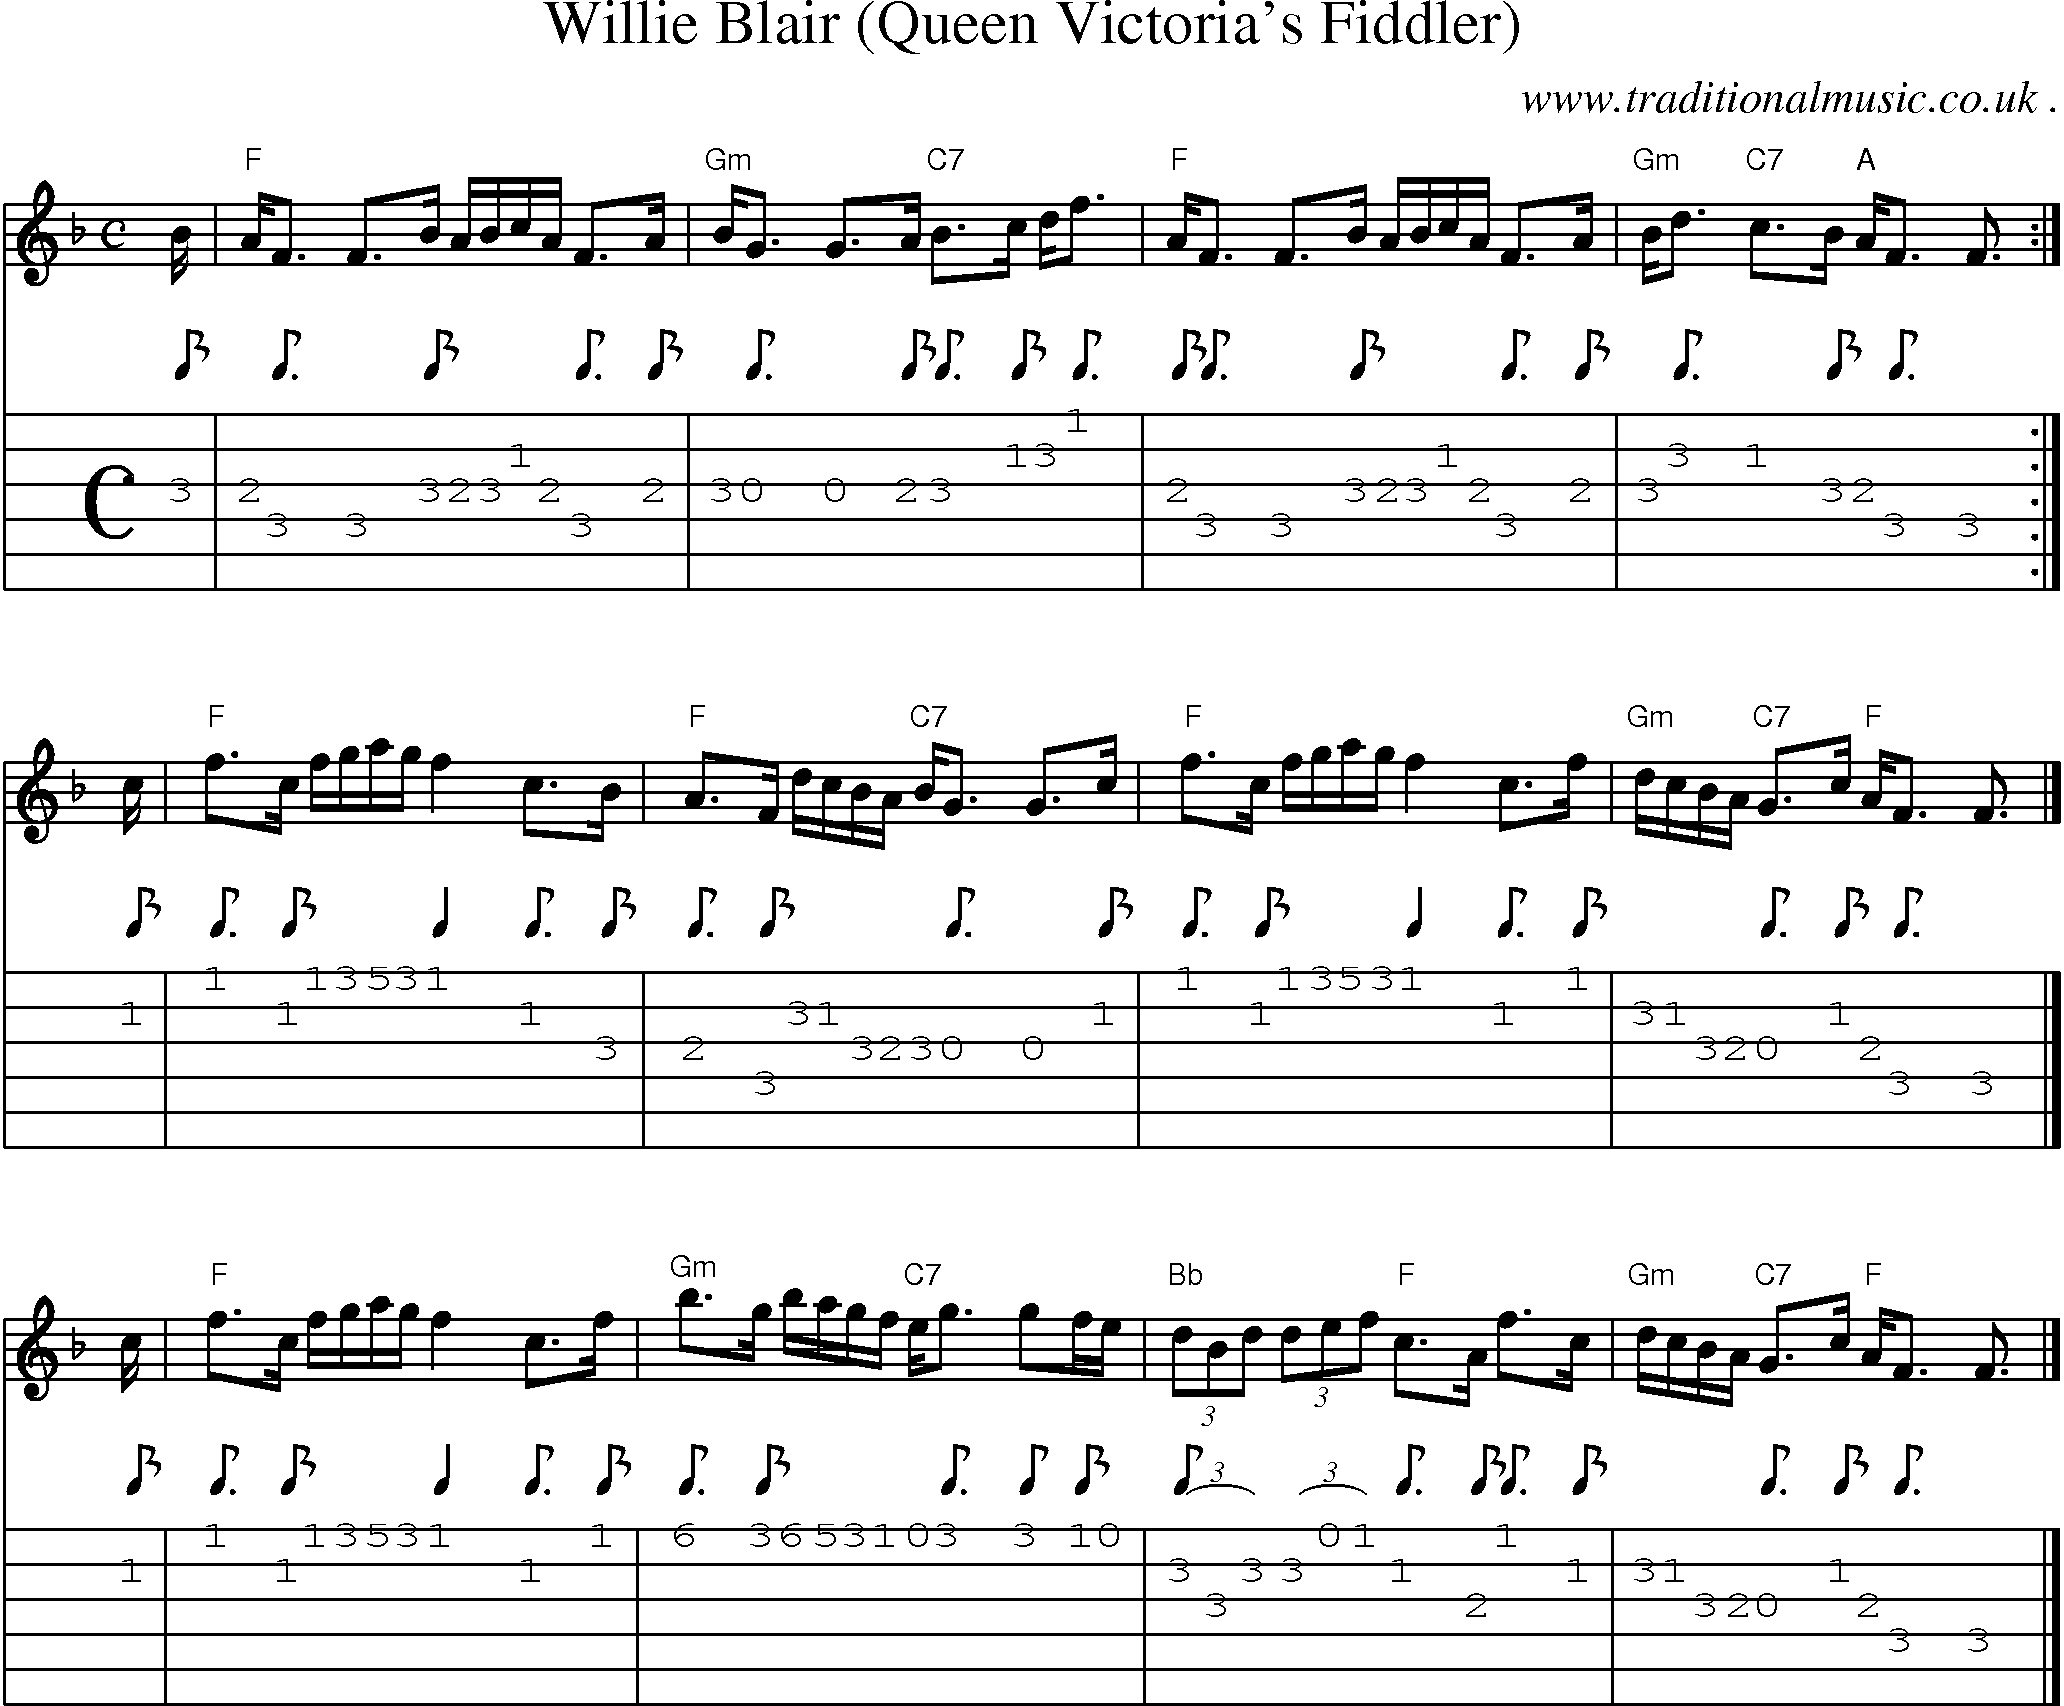 Sheet-music  score, Chords and Guitar Tabs for Willie Blair Queen Victorias Fiddler